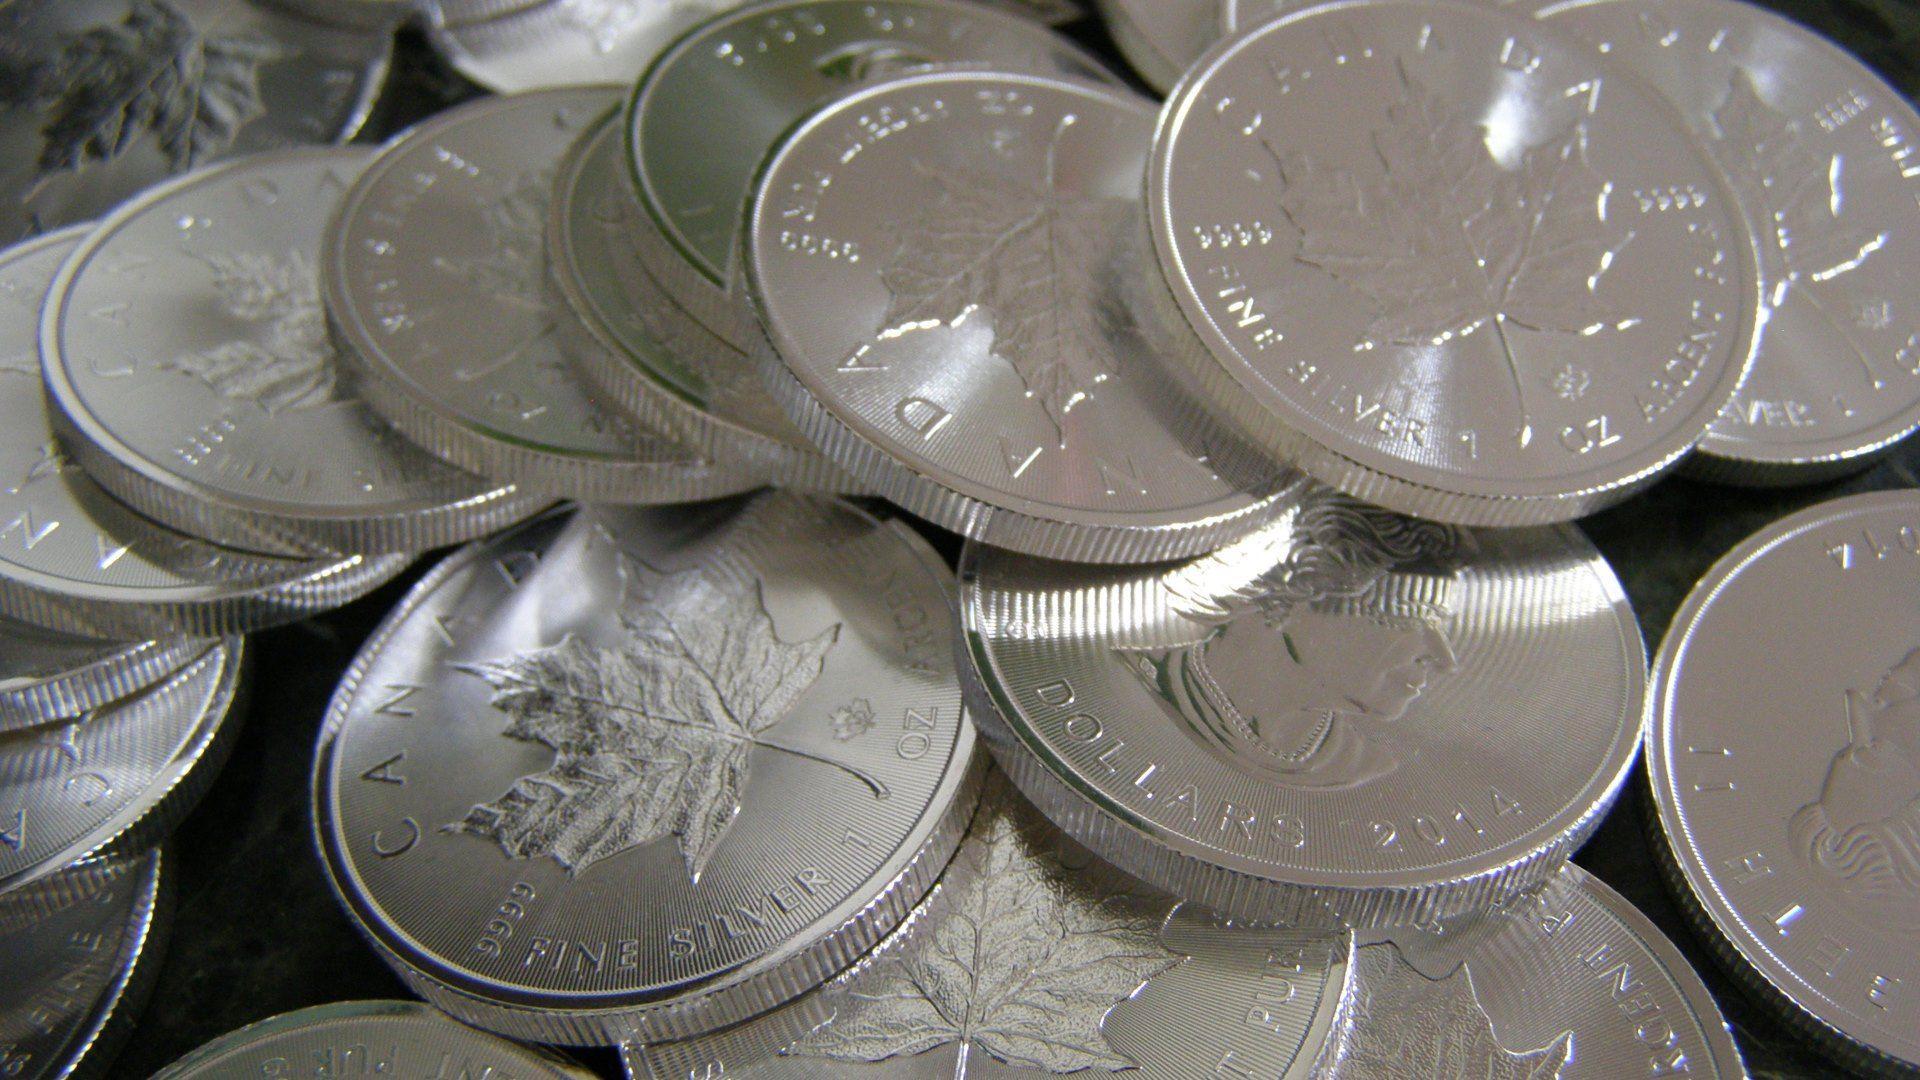 Silver Coins Wallpaper in HD, 4K and wide sizes